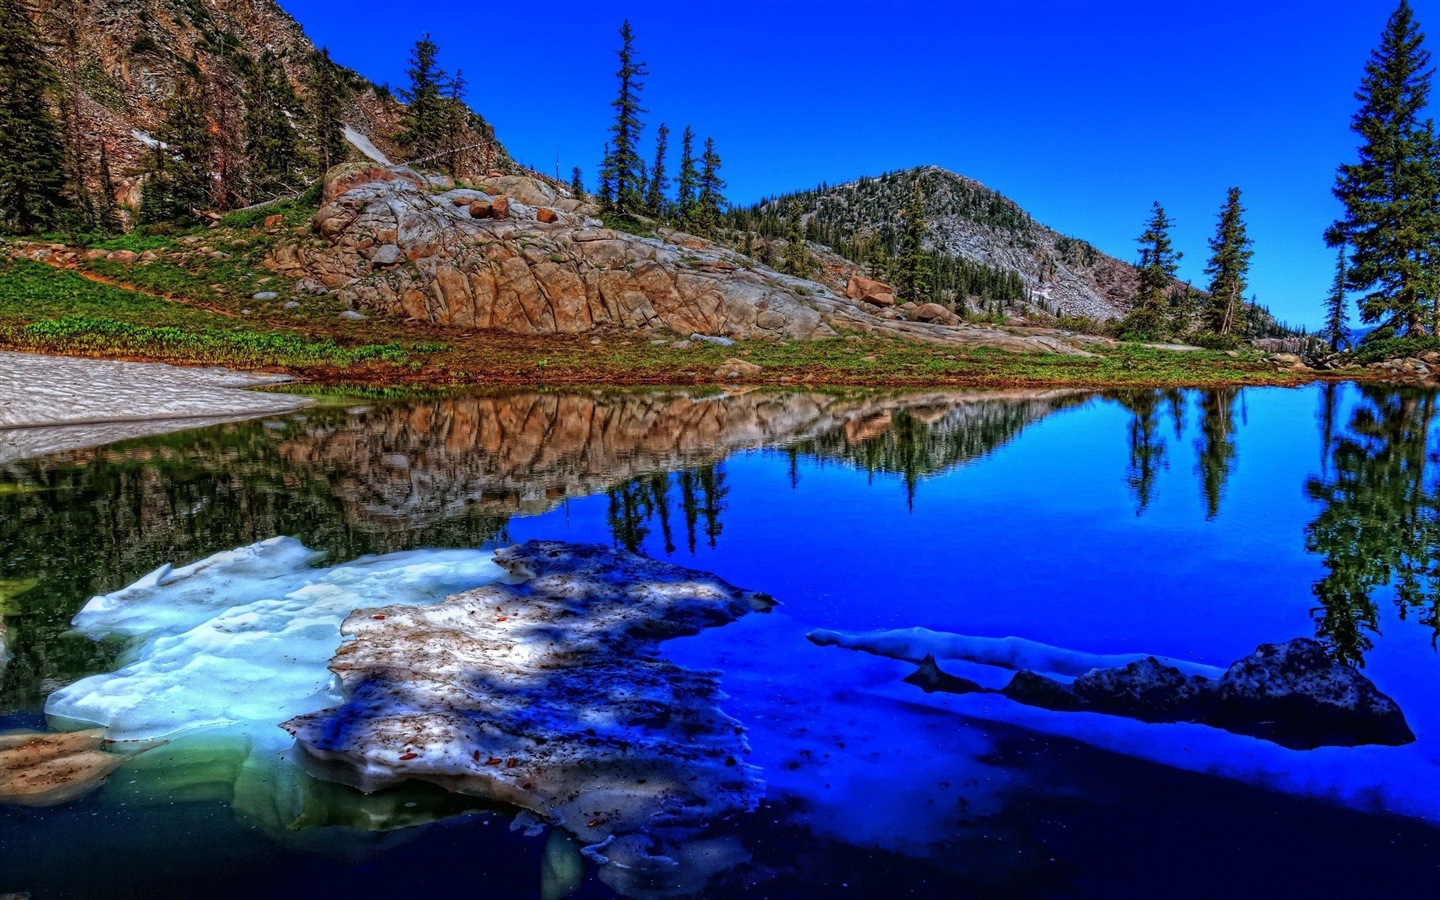 Reflection in the water natural scenery wallpaper #20 - 1440x900